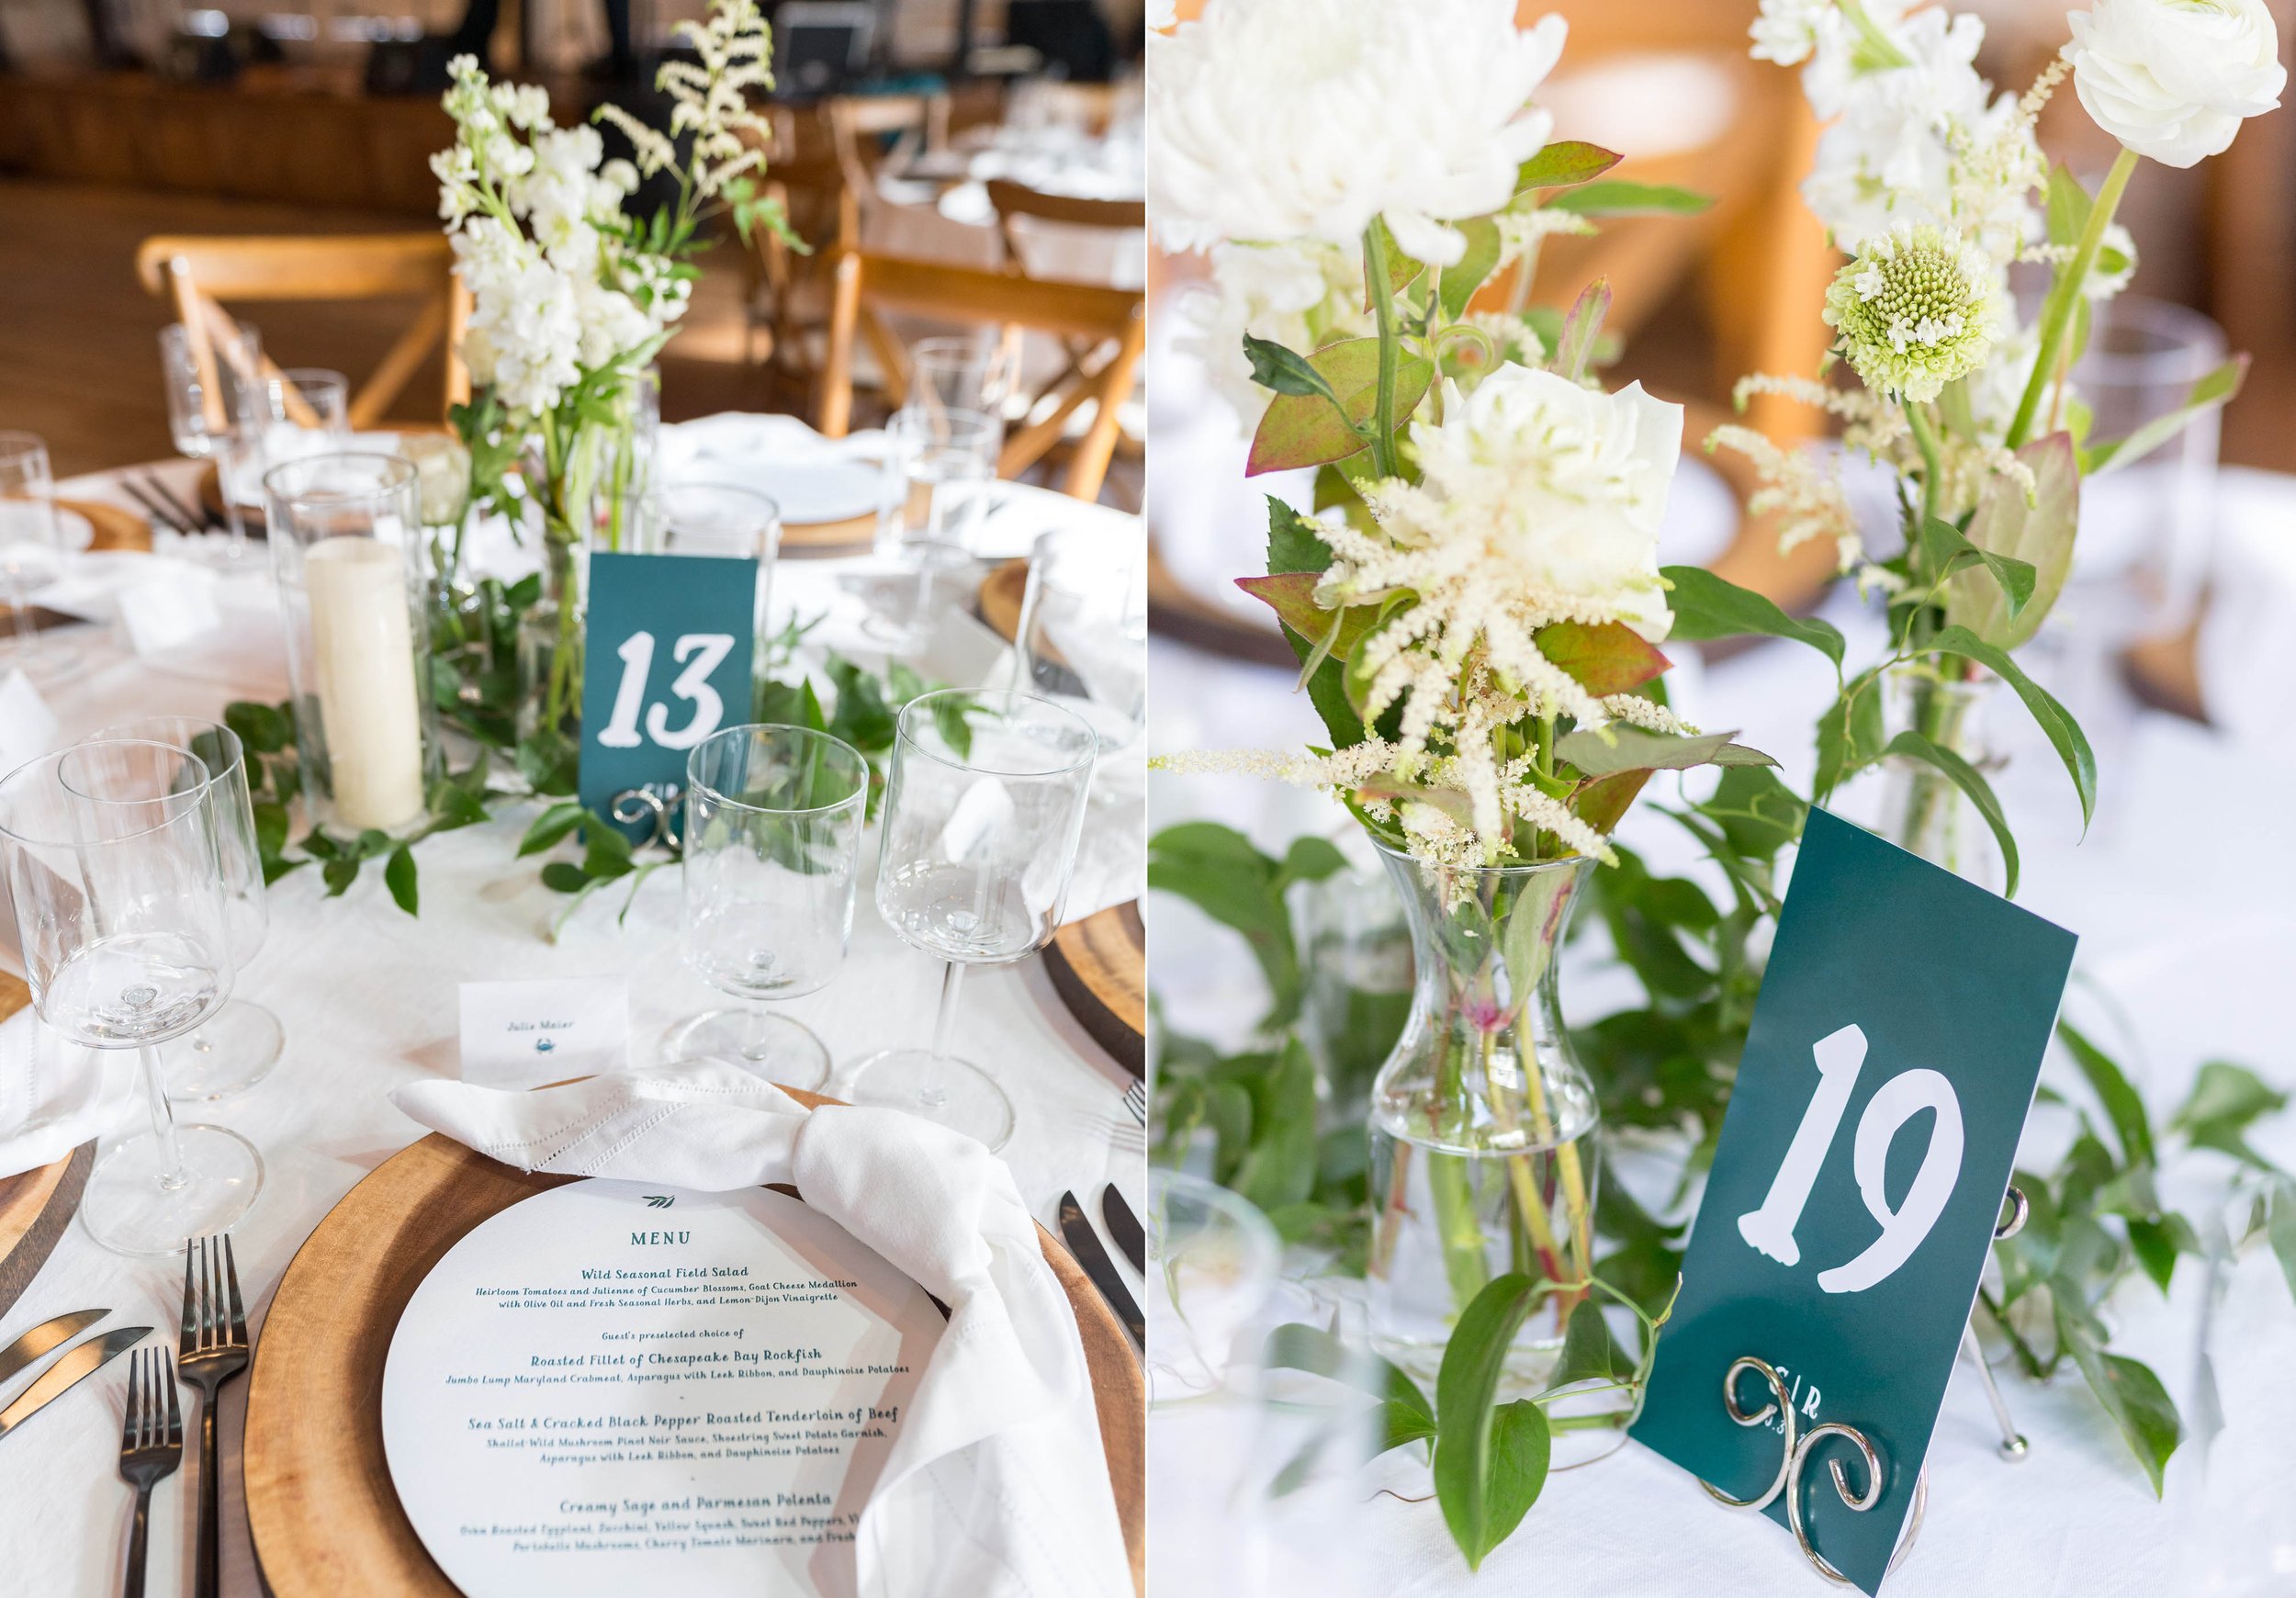 Rustic modern and romantic centerpieces at Sherwood Forest Club wedding